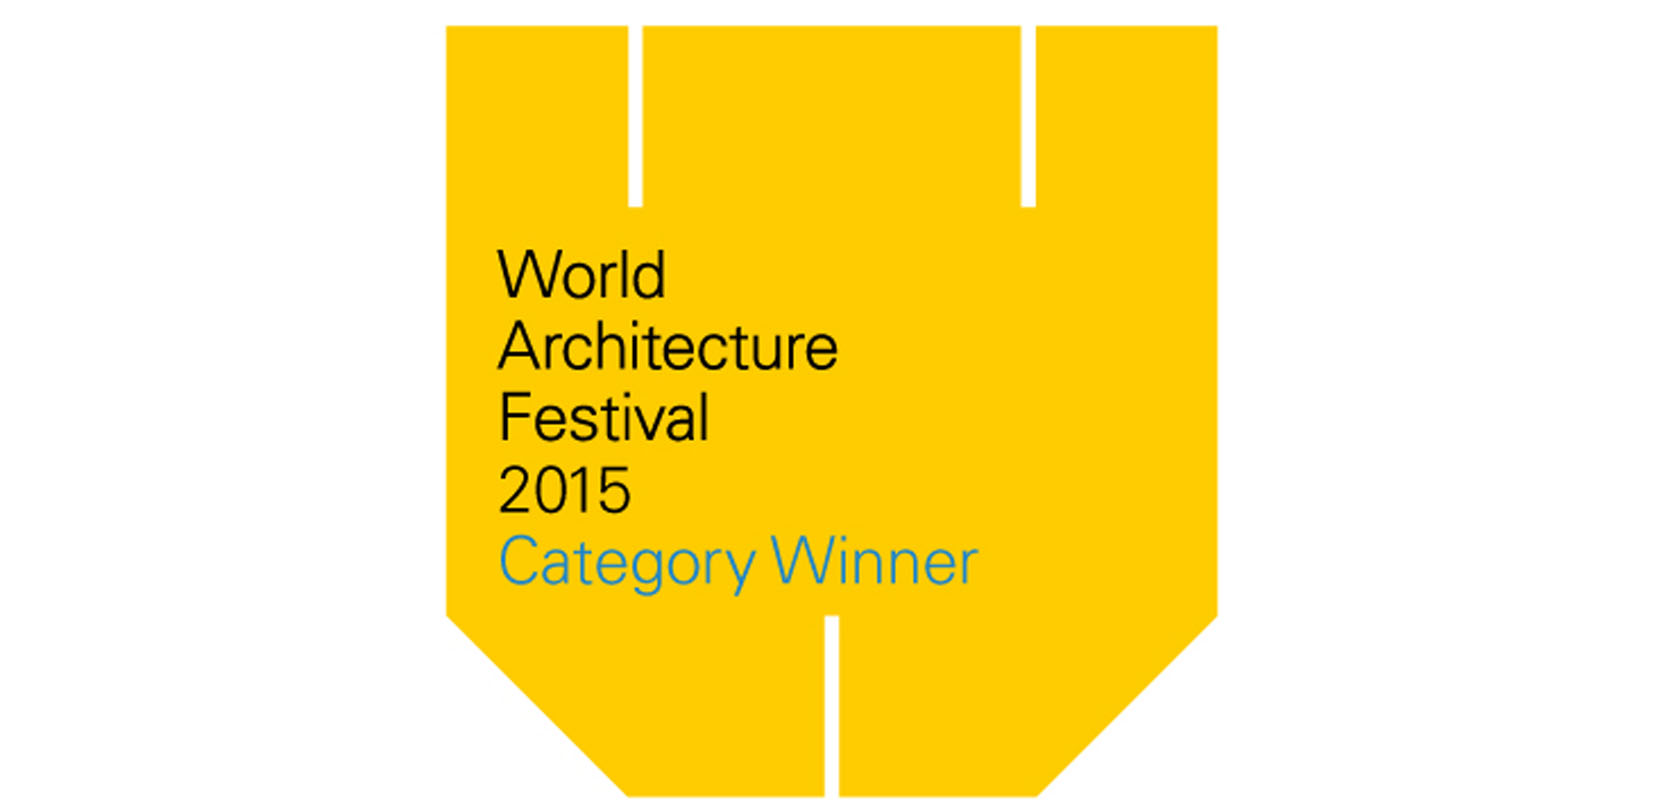 EAA – EMRE AROLAT ARCHITECTURE | Two Category Wins For Eaa On Waf’s First Day